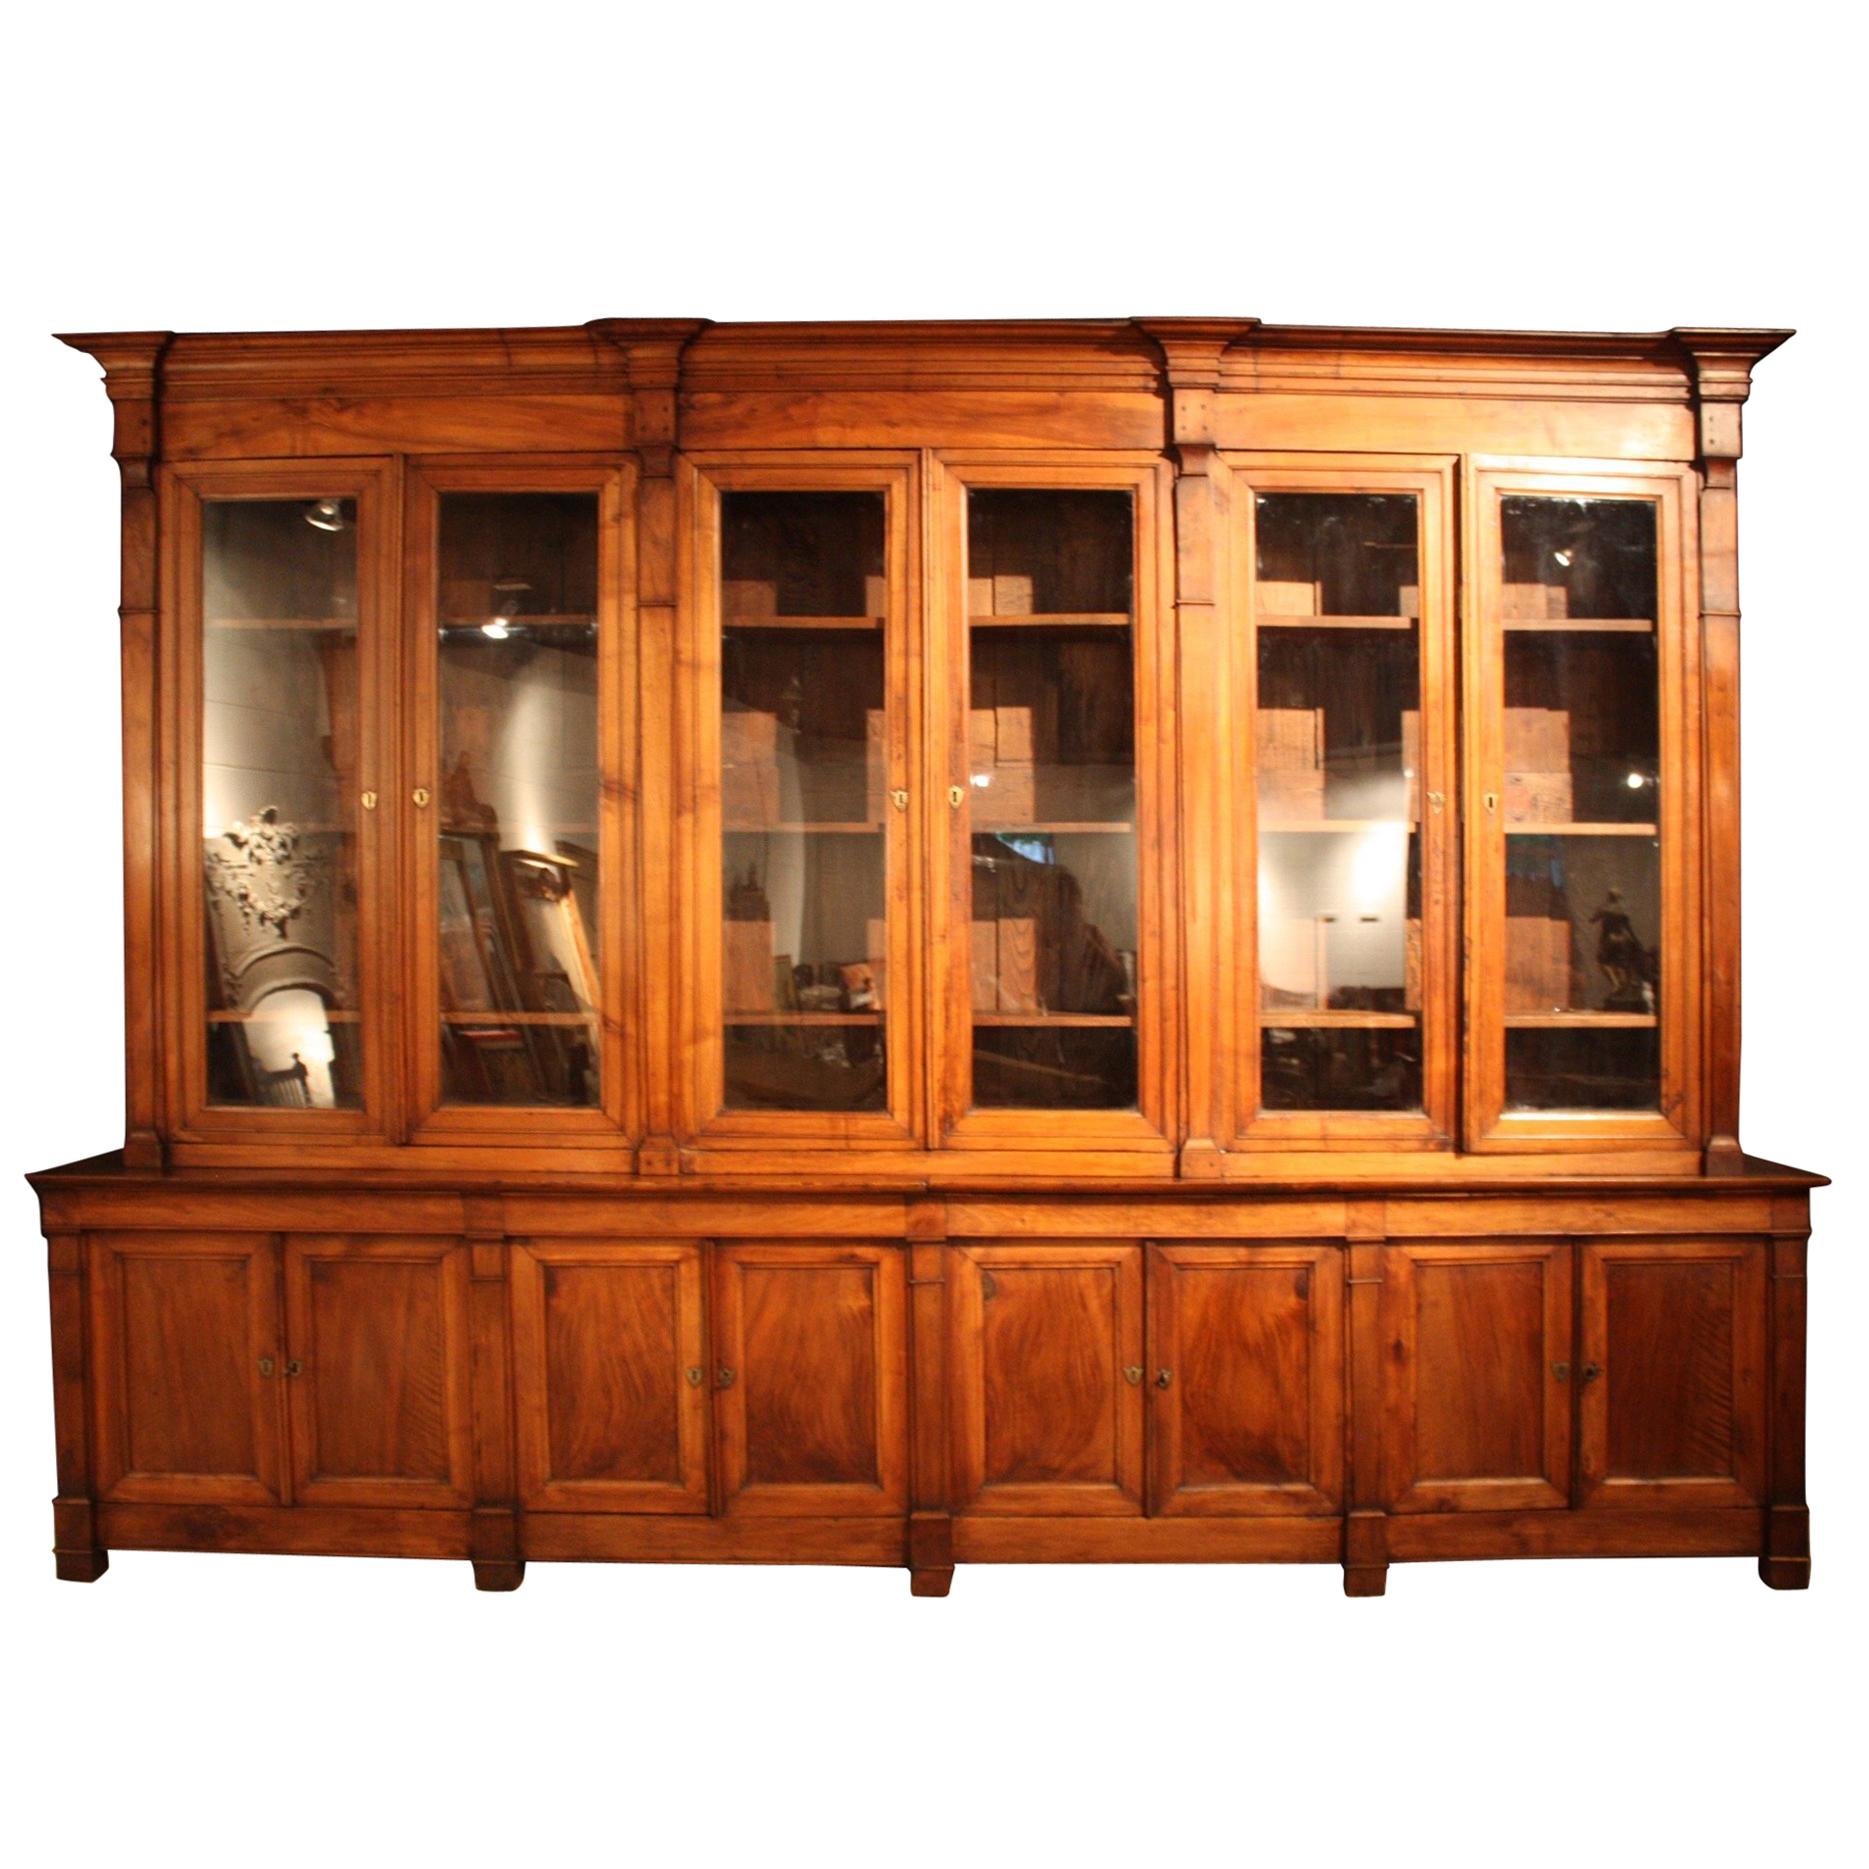 Magnificent 18th Century French Cabinet "Deux-Corps"